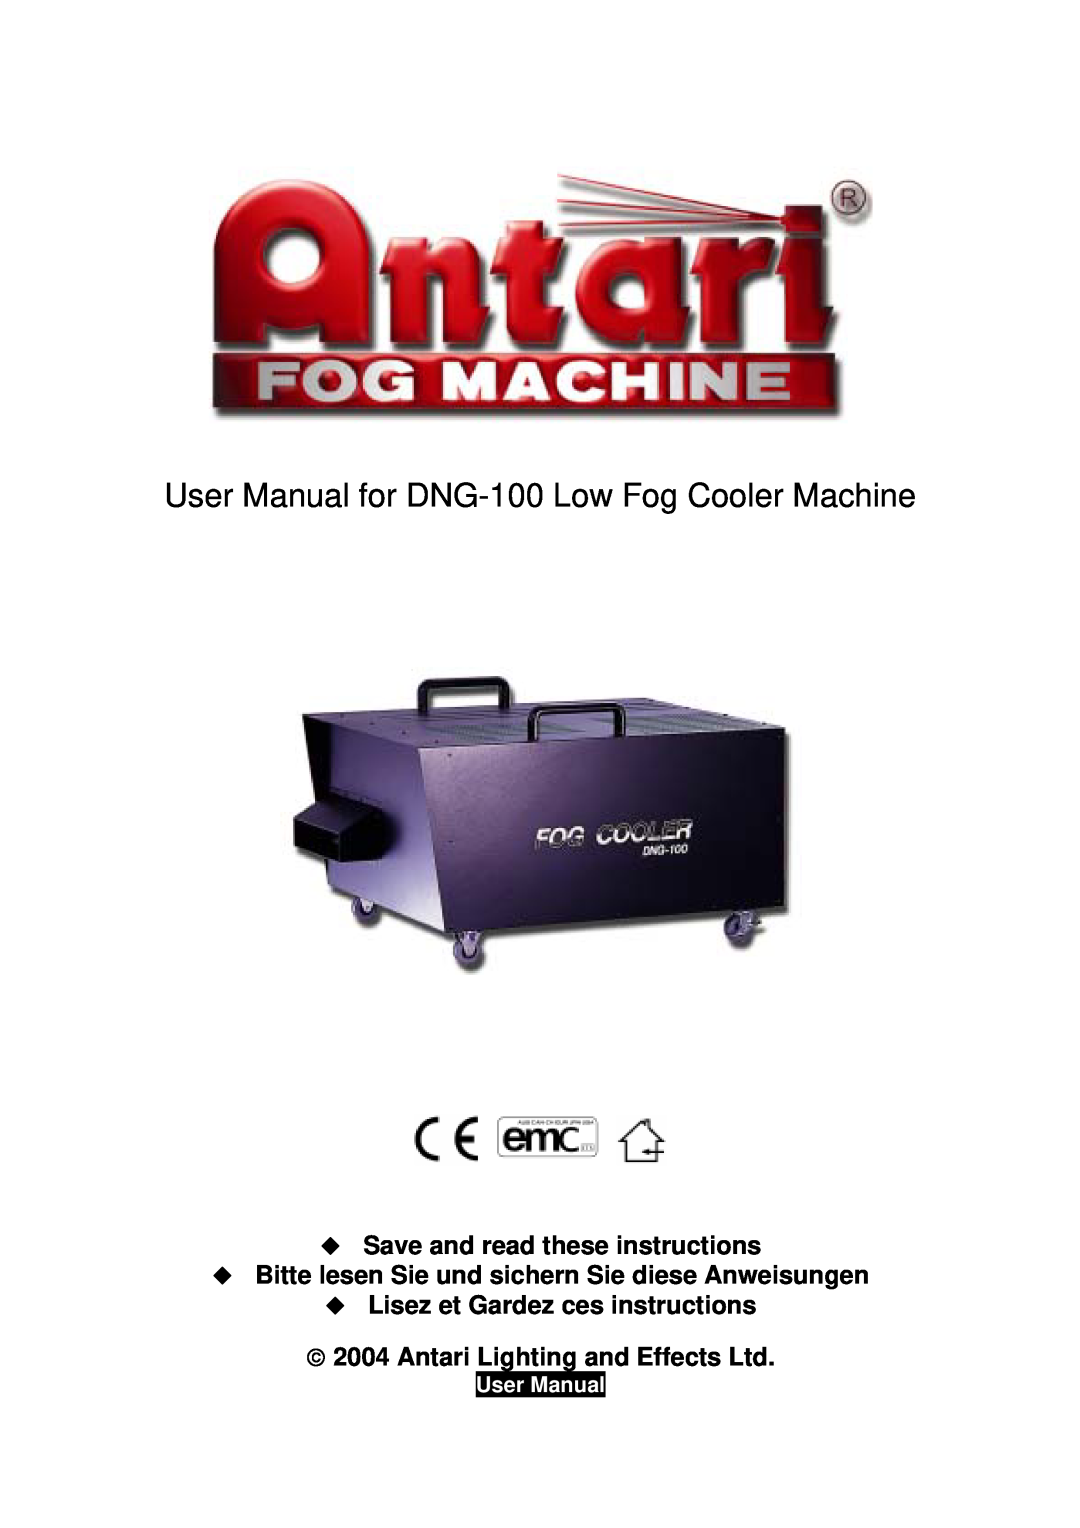 Antari Lighting and Effects DNG-100 user manual ‹ Save and read these instructions, ‹ Lisez et Gardez ces instructions 